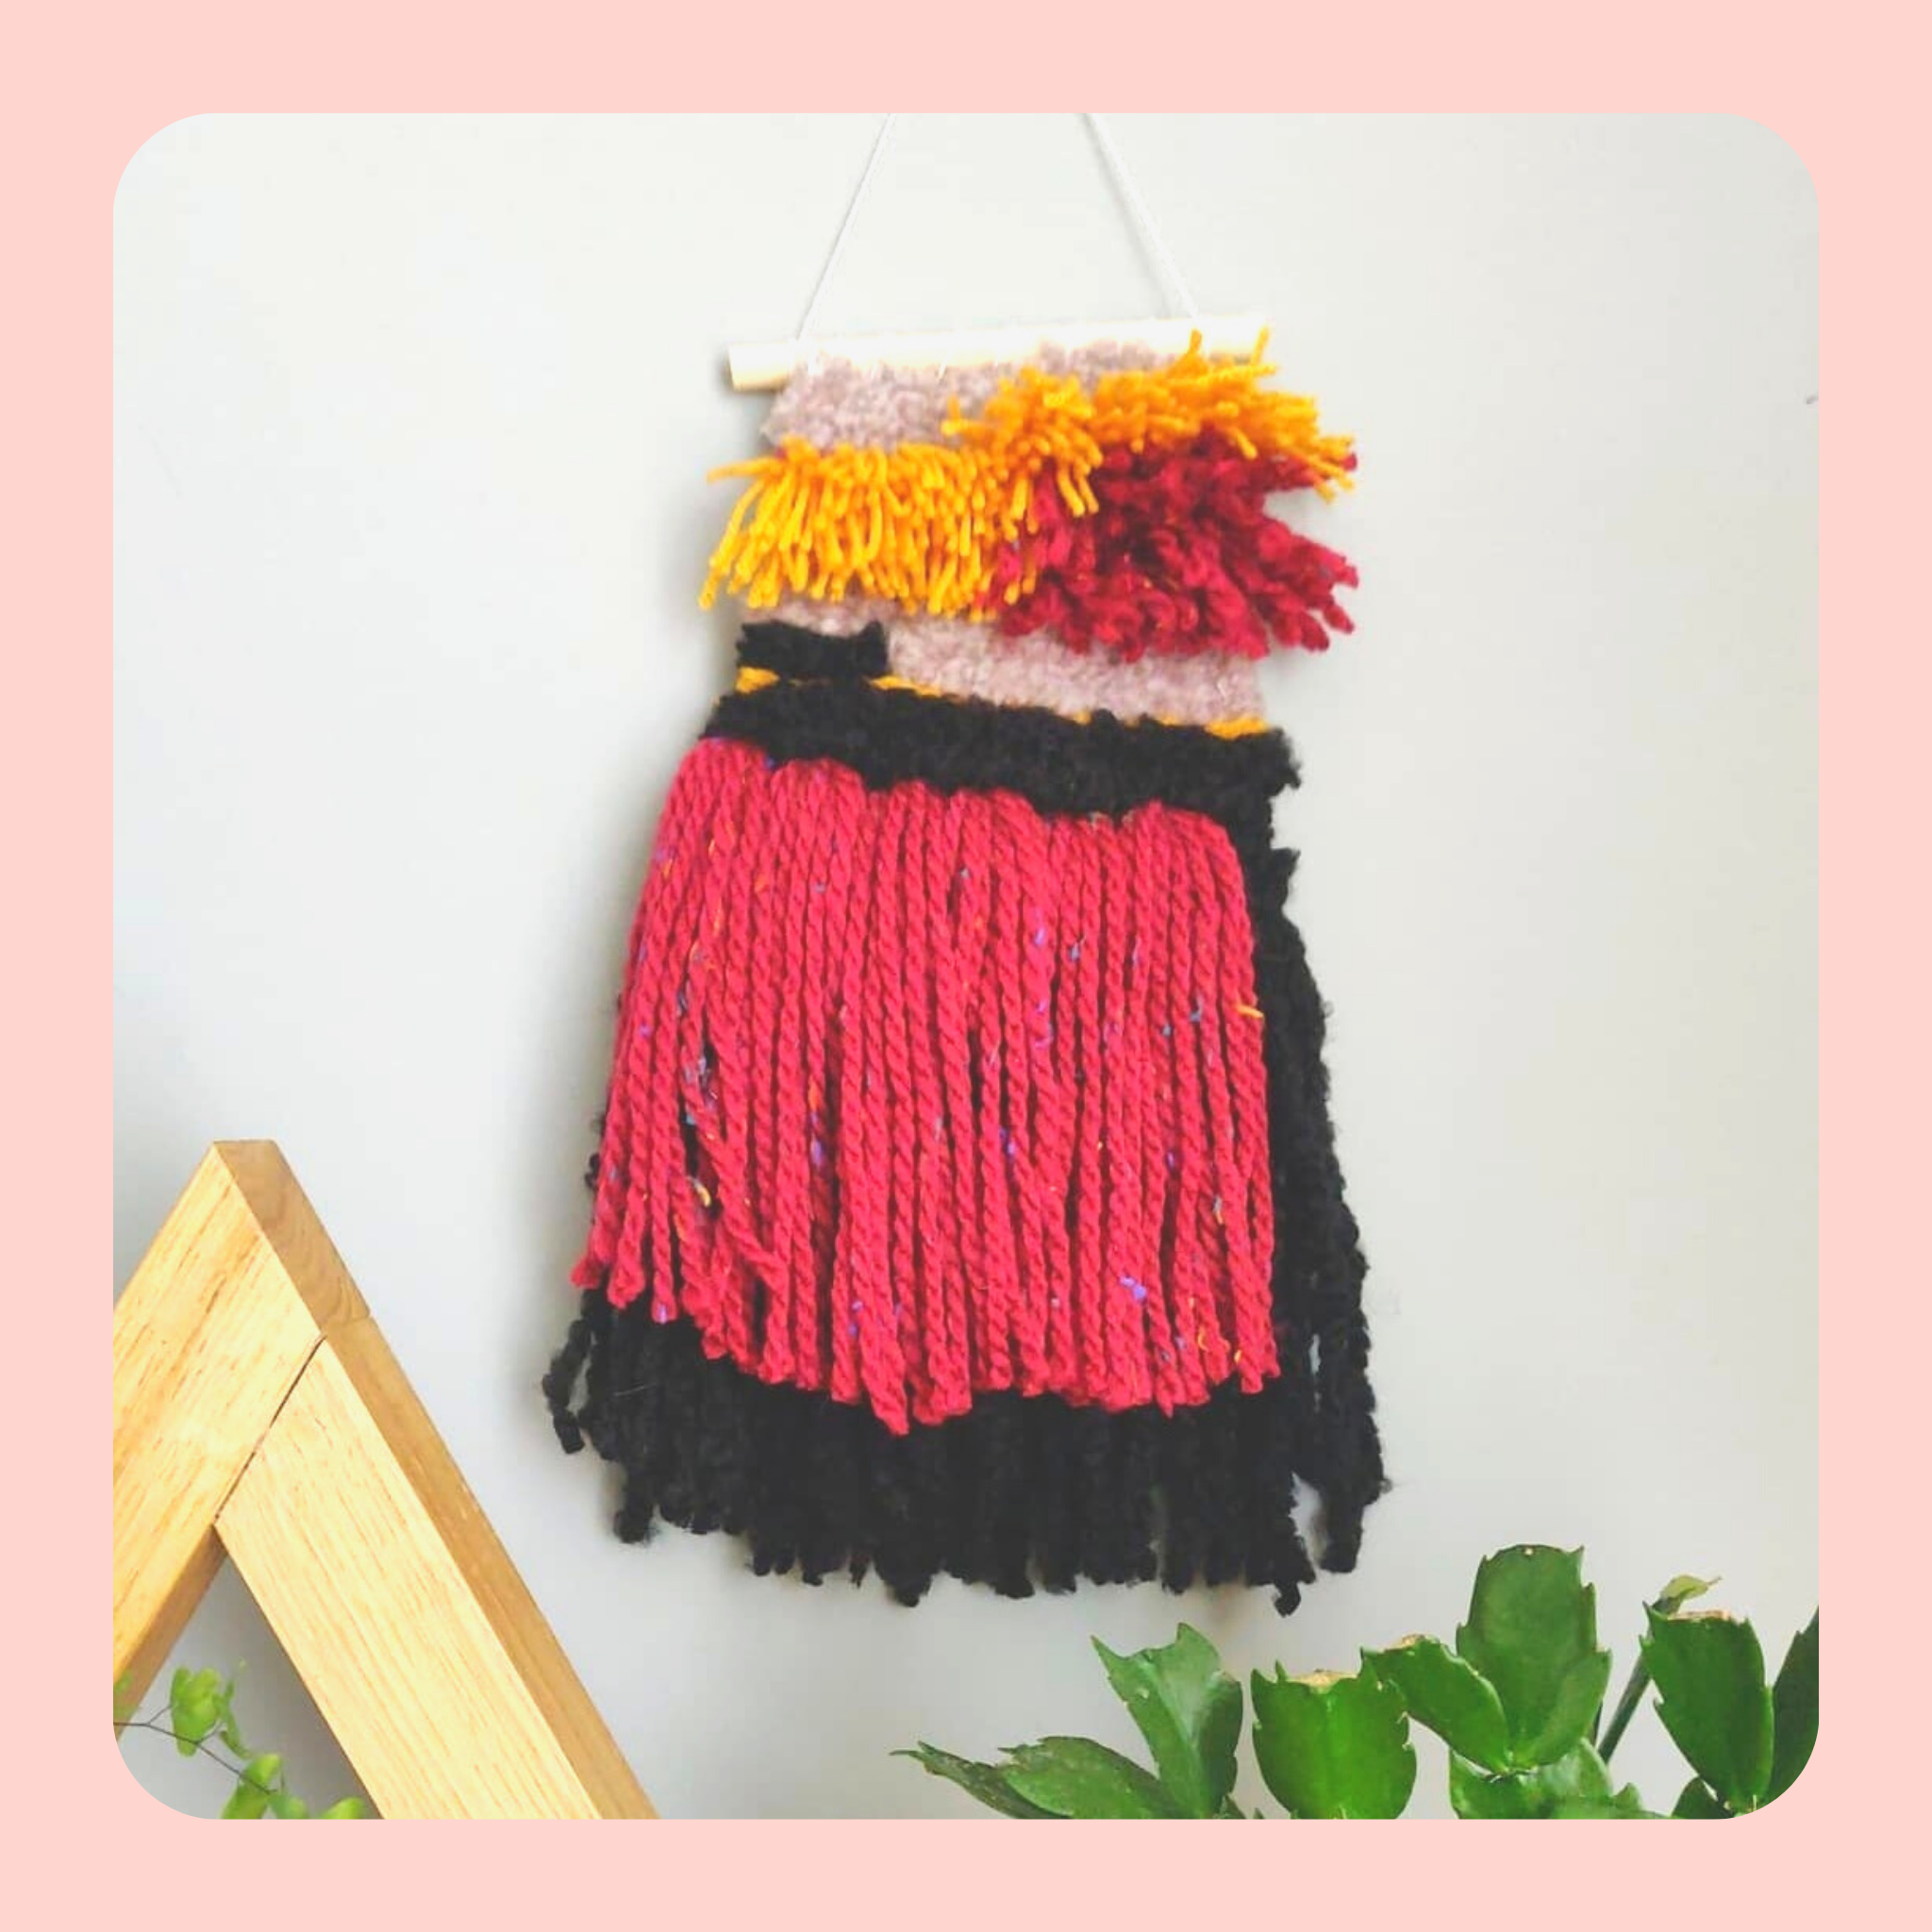 Red, black and yellow Woven wall hanging.